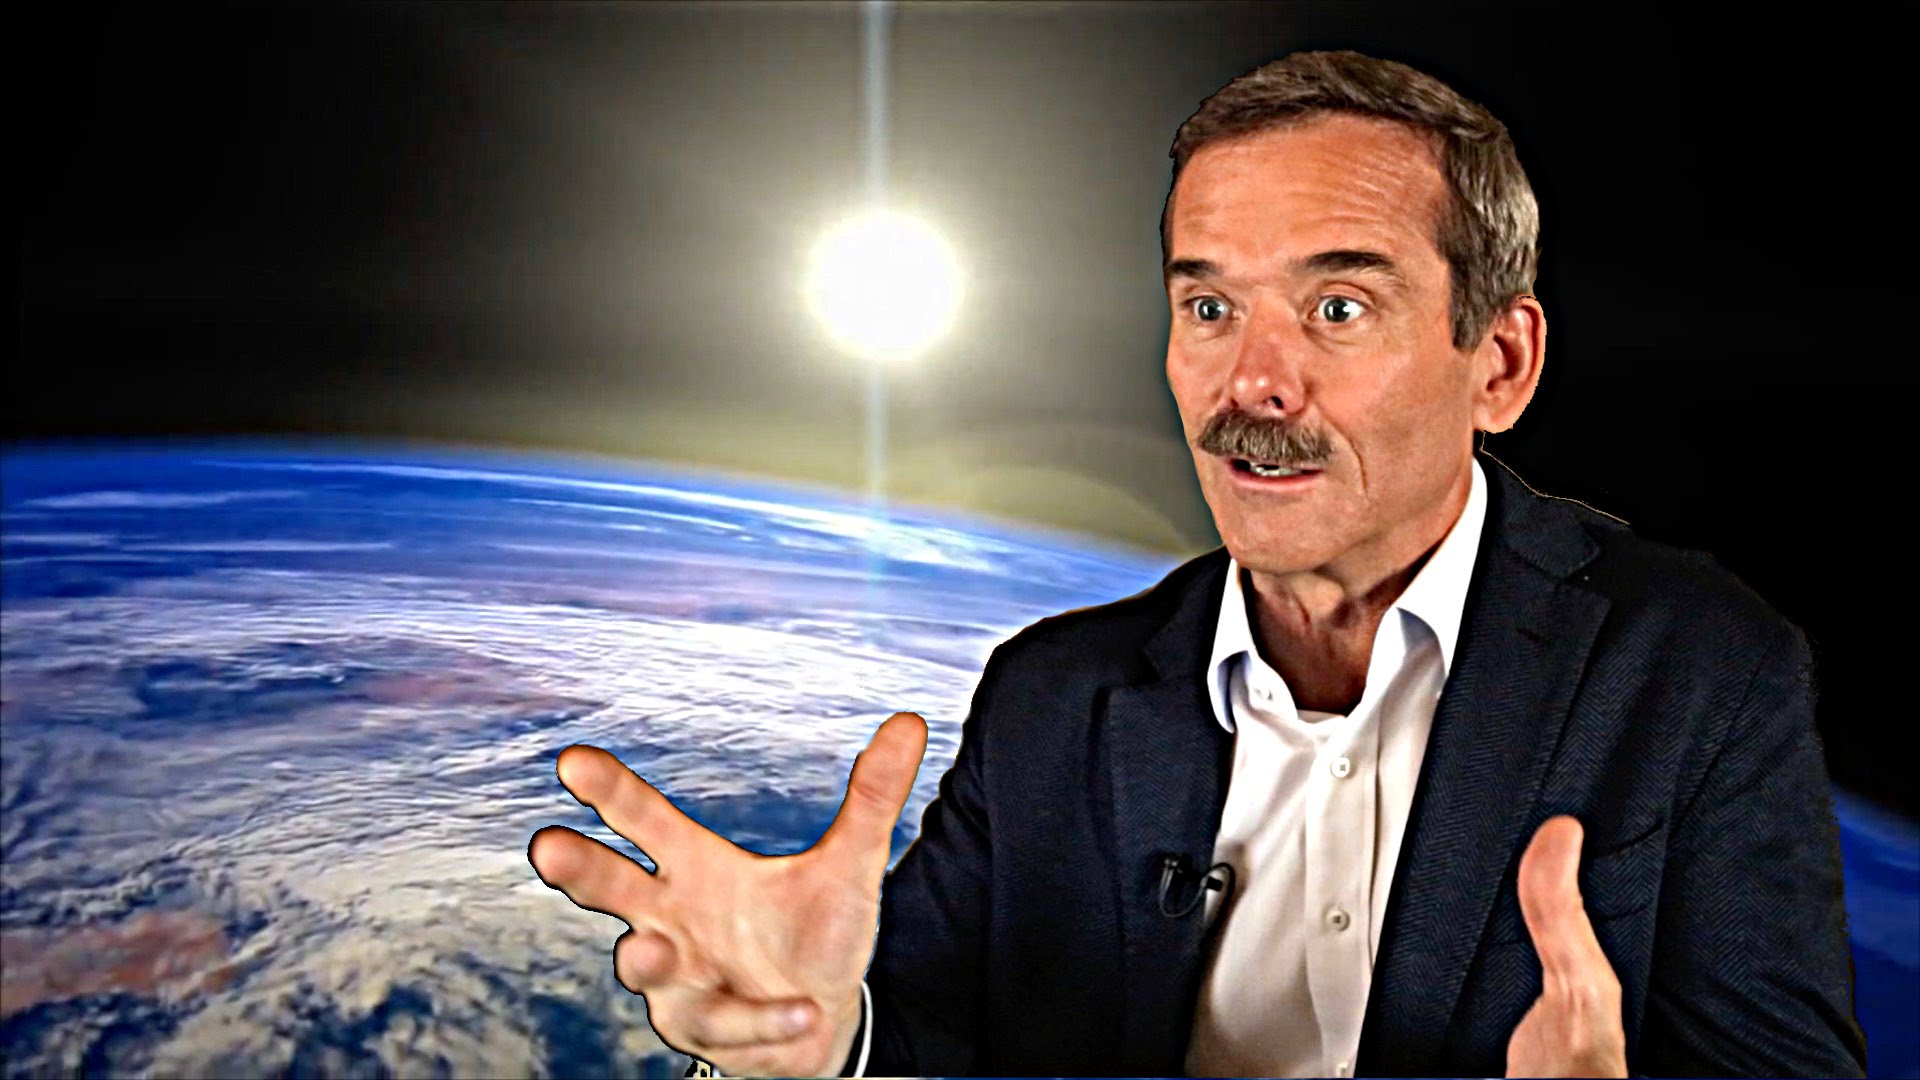 An Astronaut's View of Earth with Col. Chris Hadfield